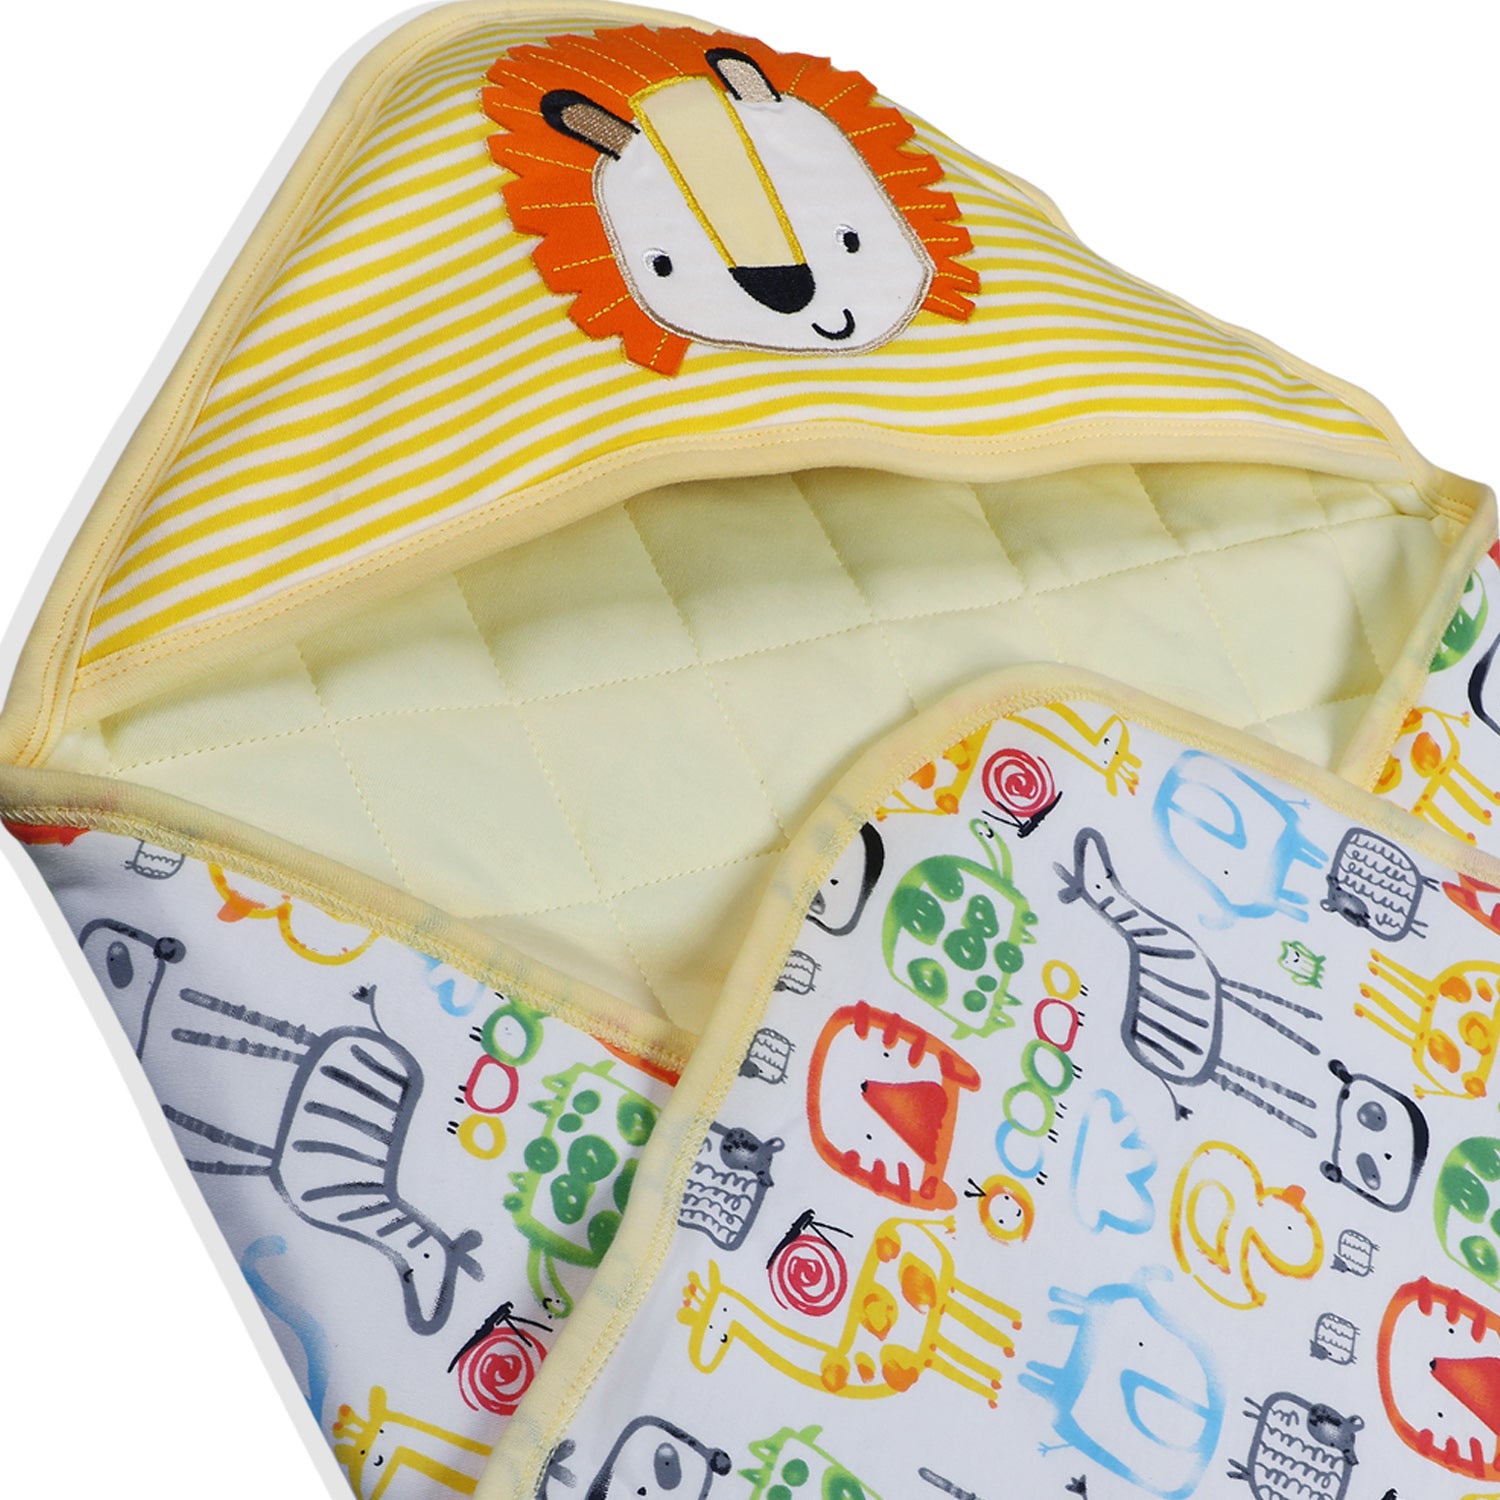 Baby Moo Roaring Lion Warm Hooded Quilted Wrapper - Yellow - Baby Moo